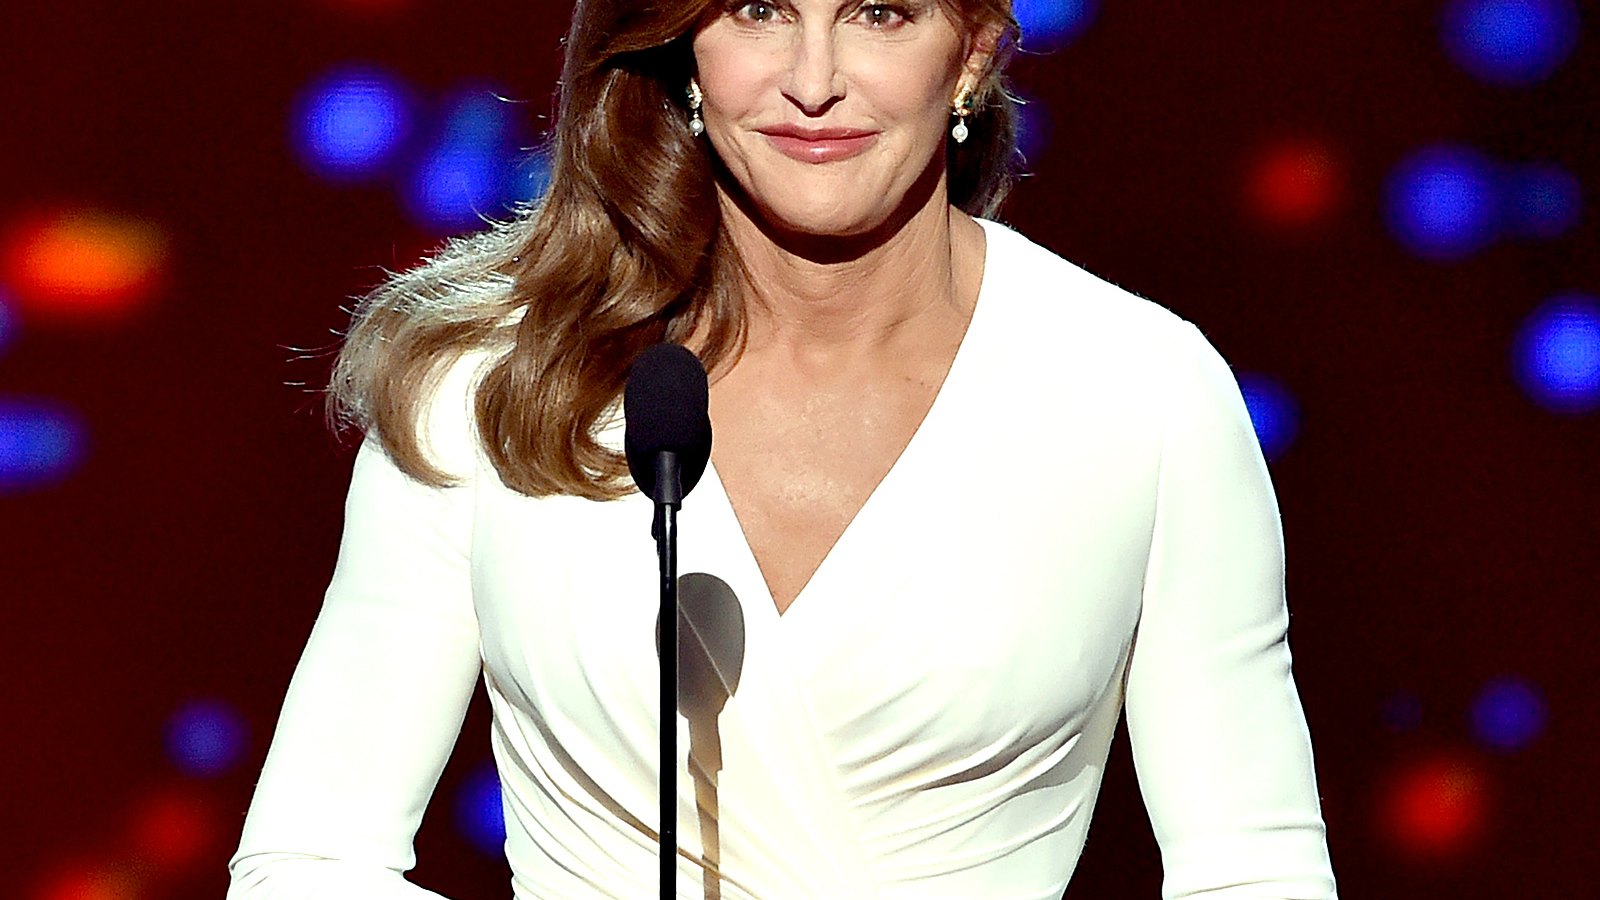 Caitlyn Jenner onstage during the 2015 Espy Awards